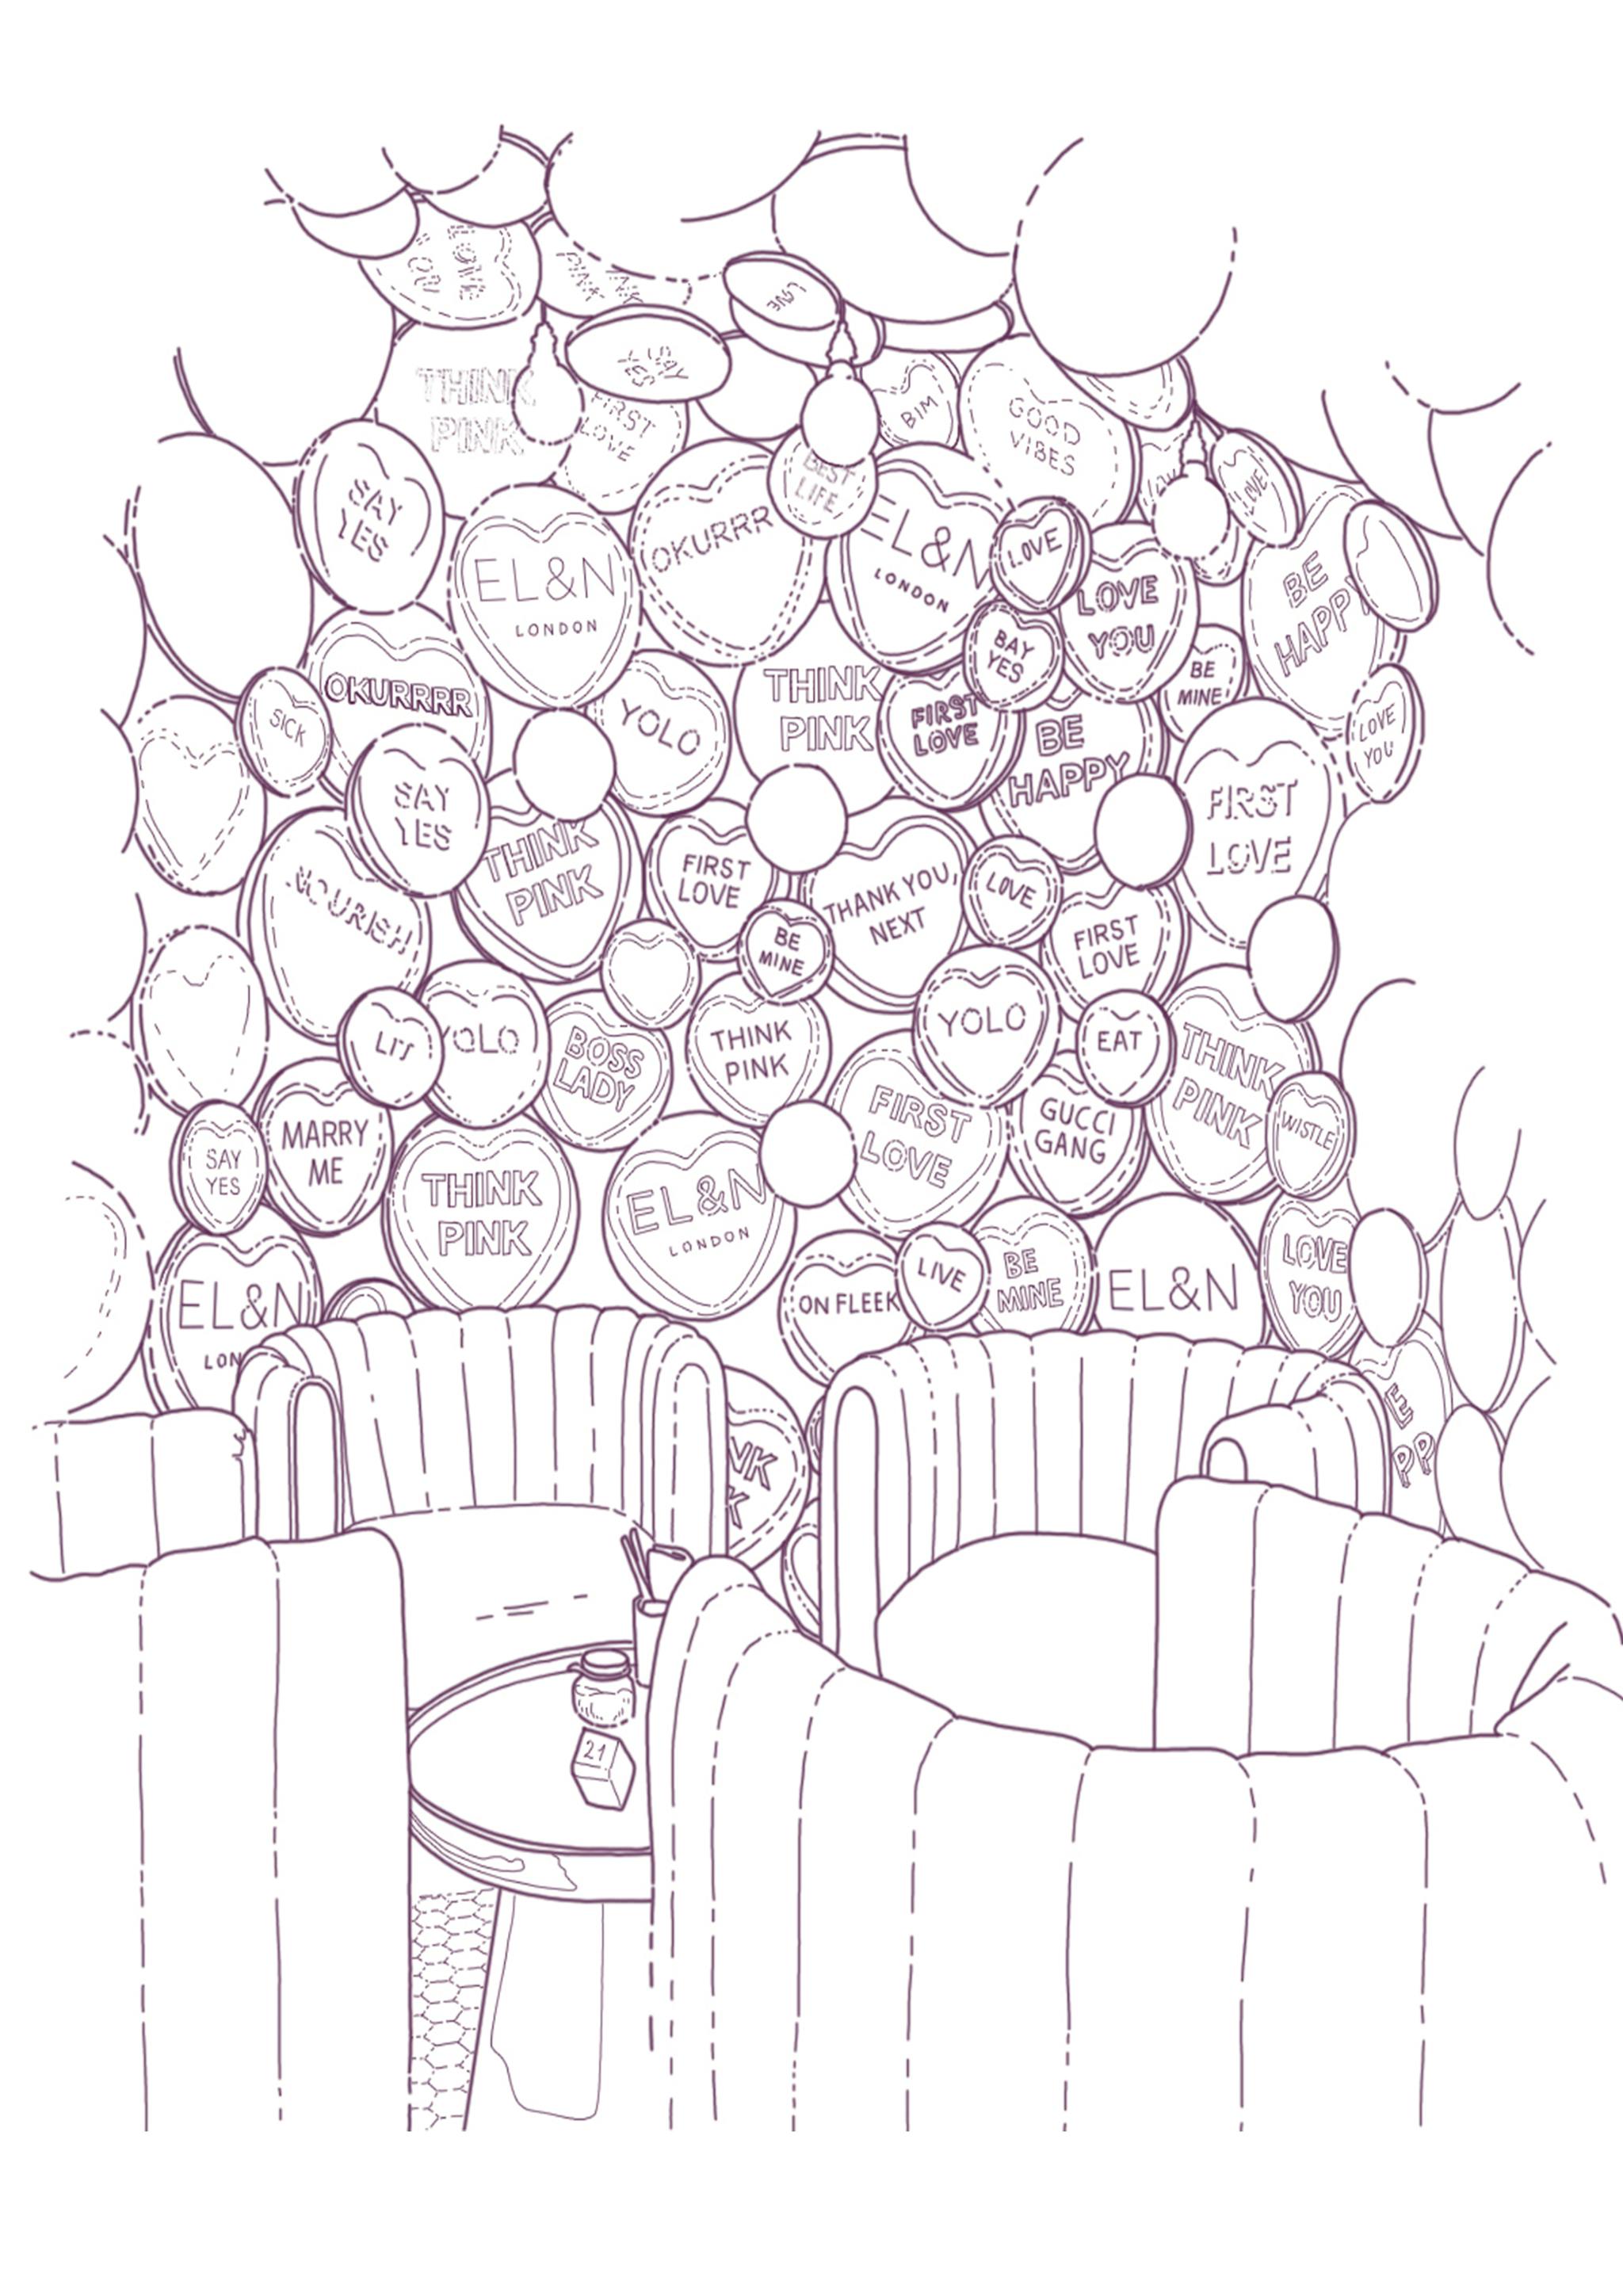 illustration of a cosy scene at elan's café. Four seats surrounded by hearts on the wall